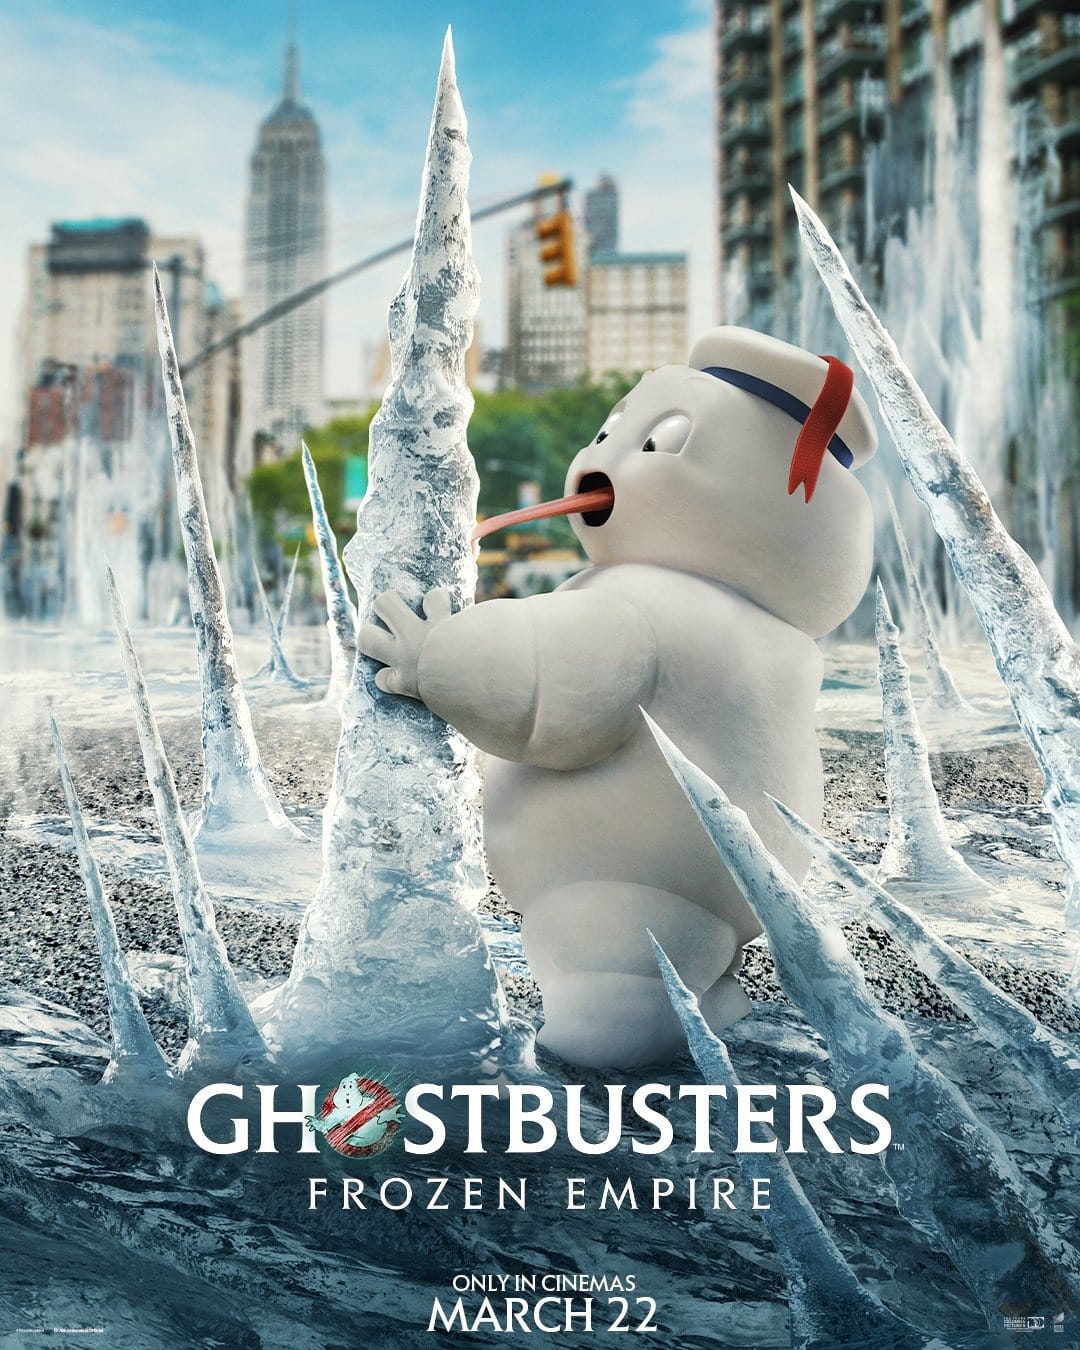 The movie poster for "Ghostbusters: Frozen Empire"